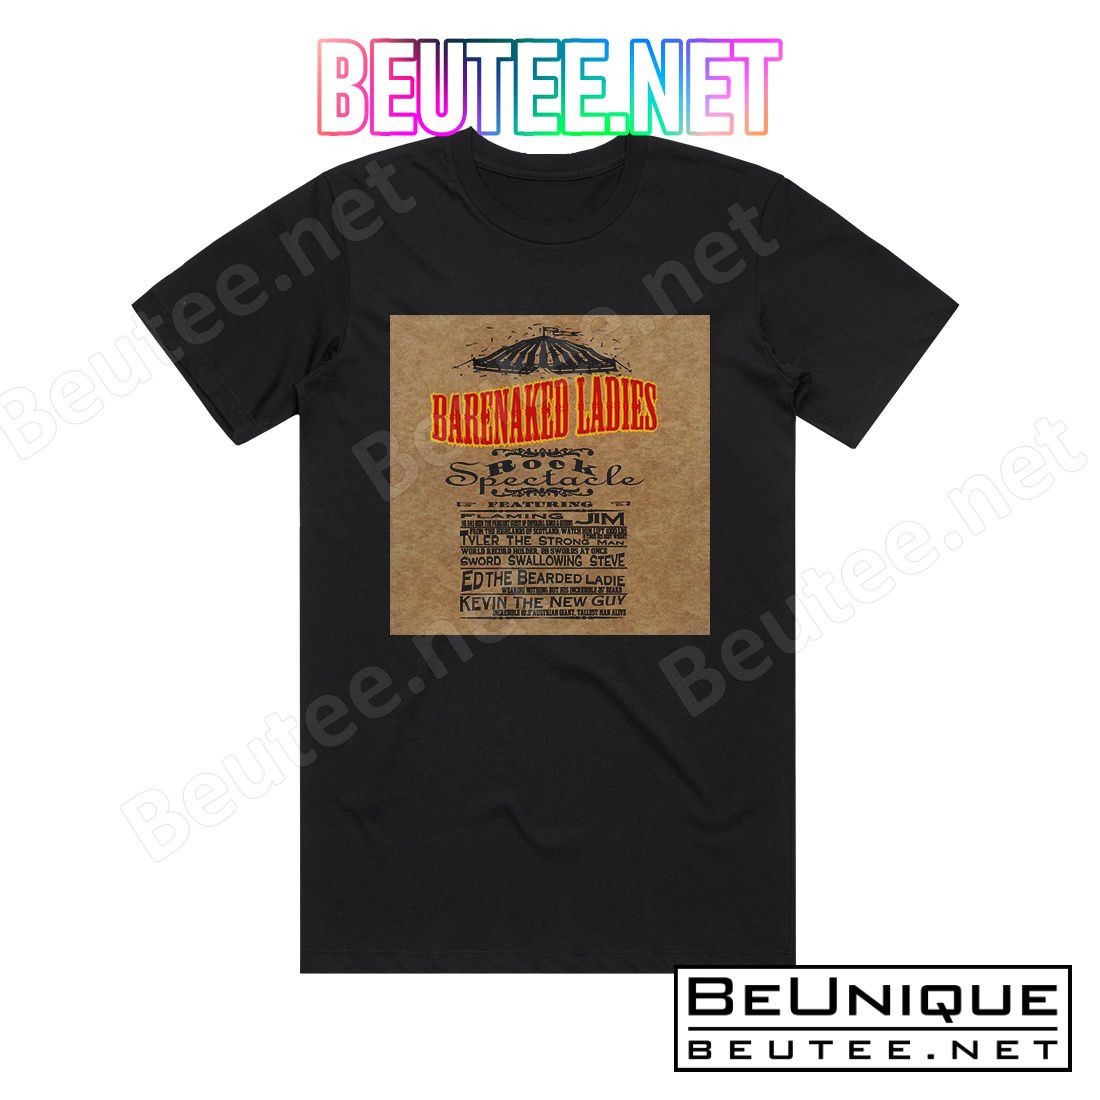 Barenaked Ladies Rock Spectacle Album Cover T-Shirt